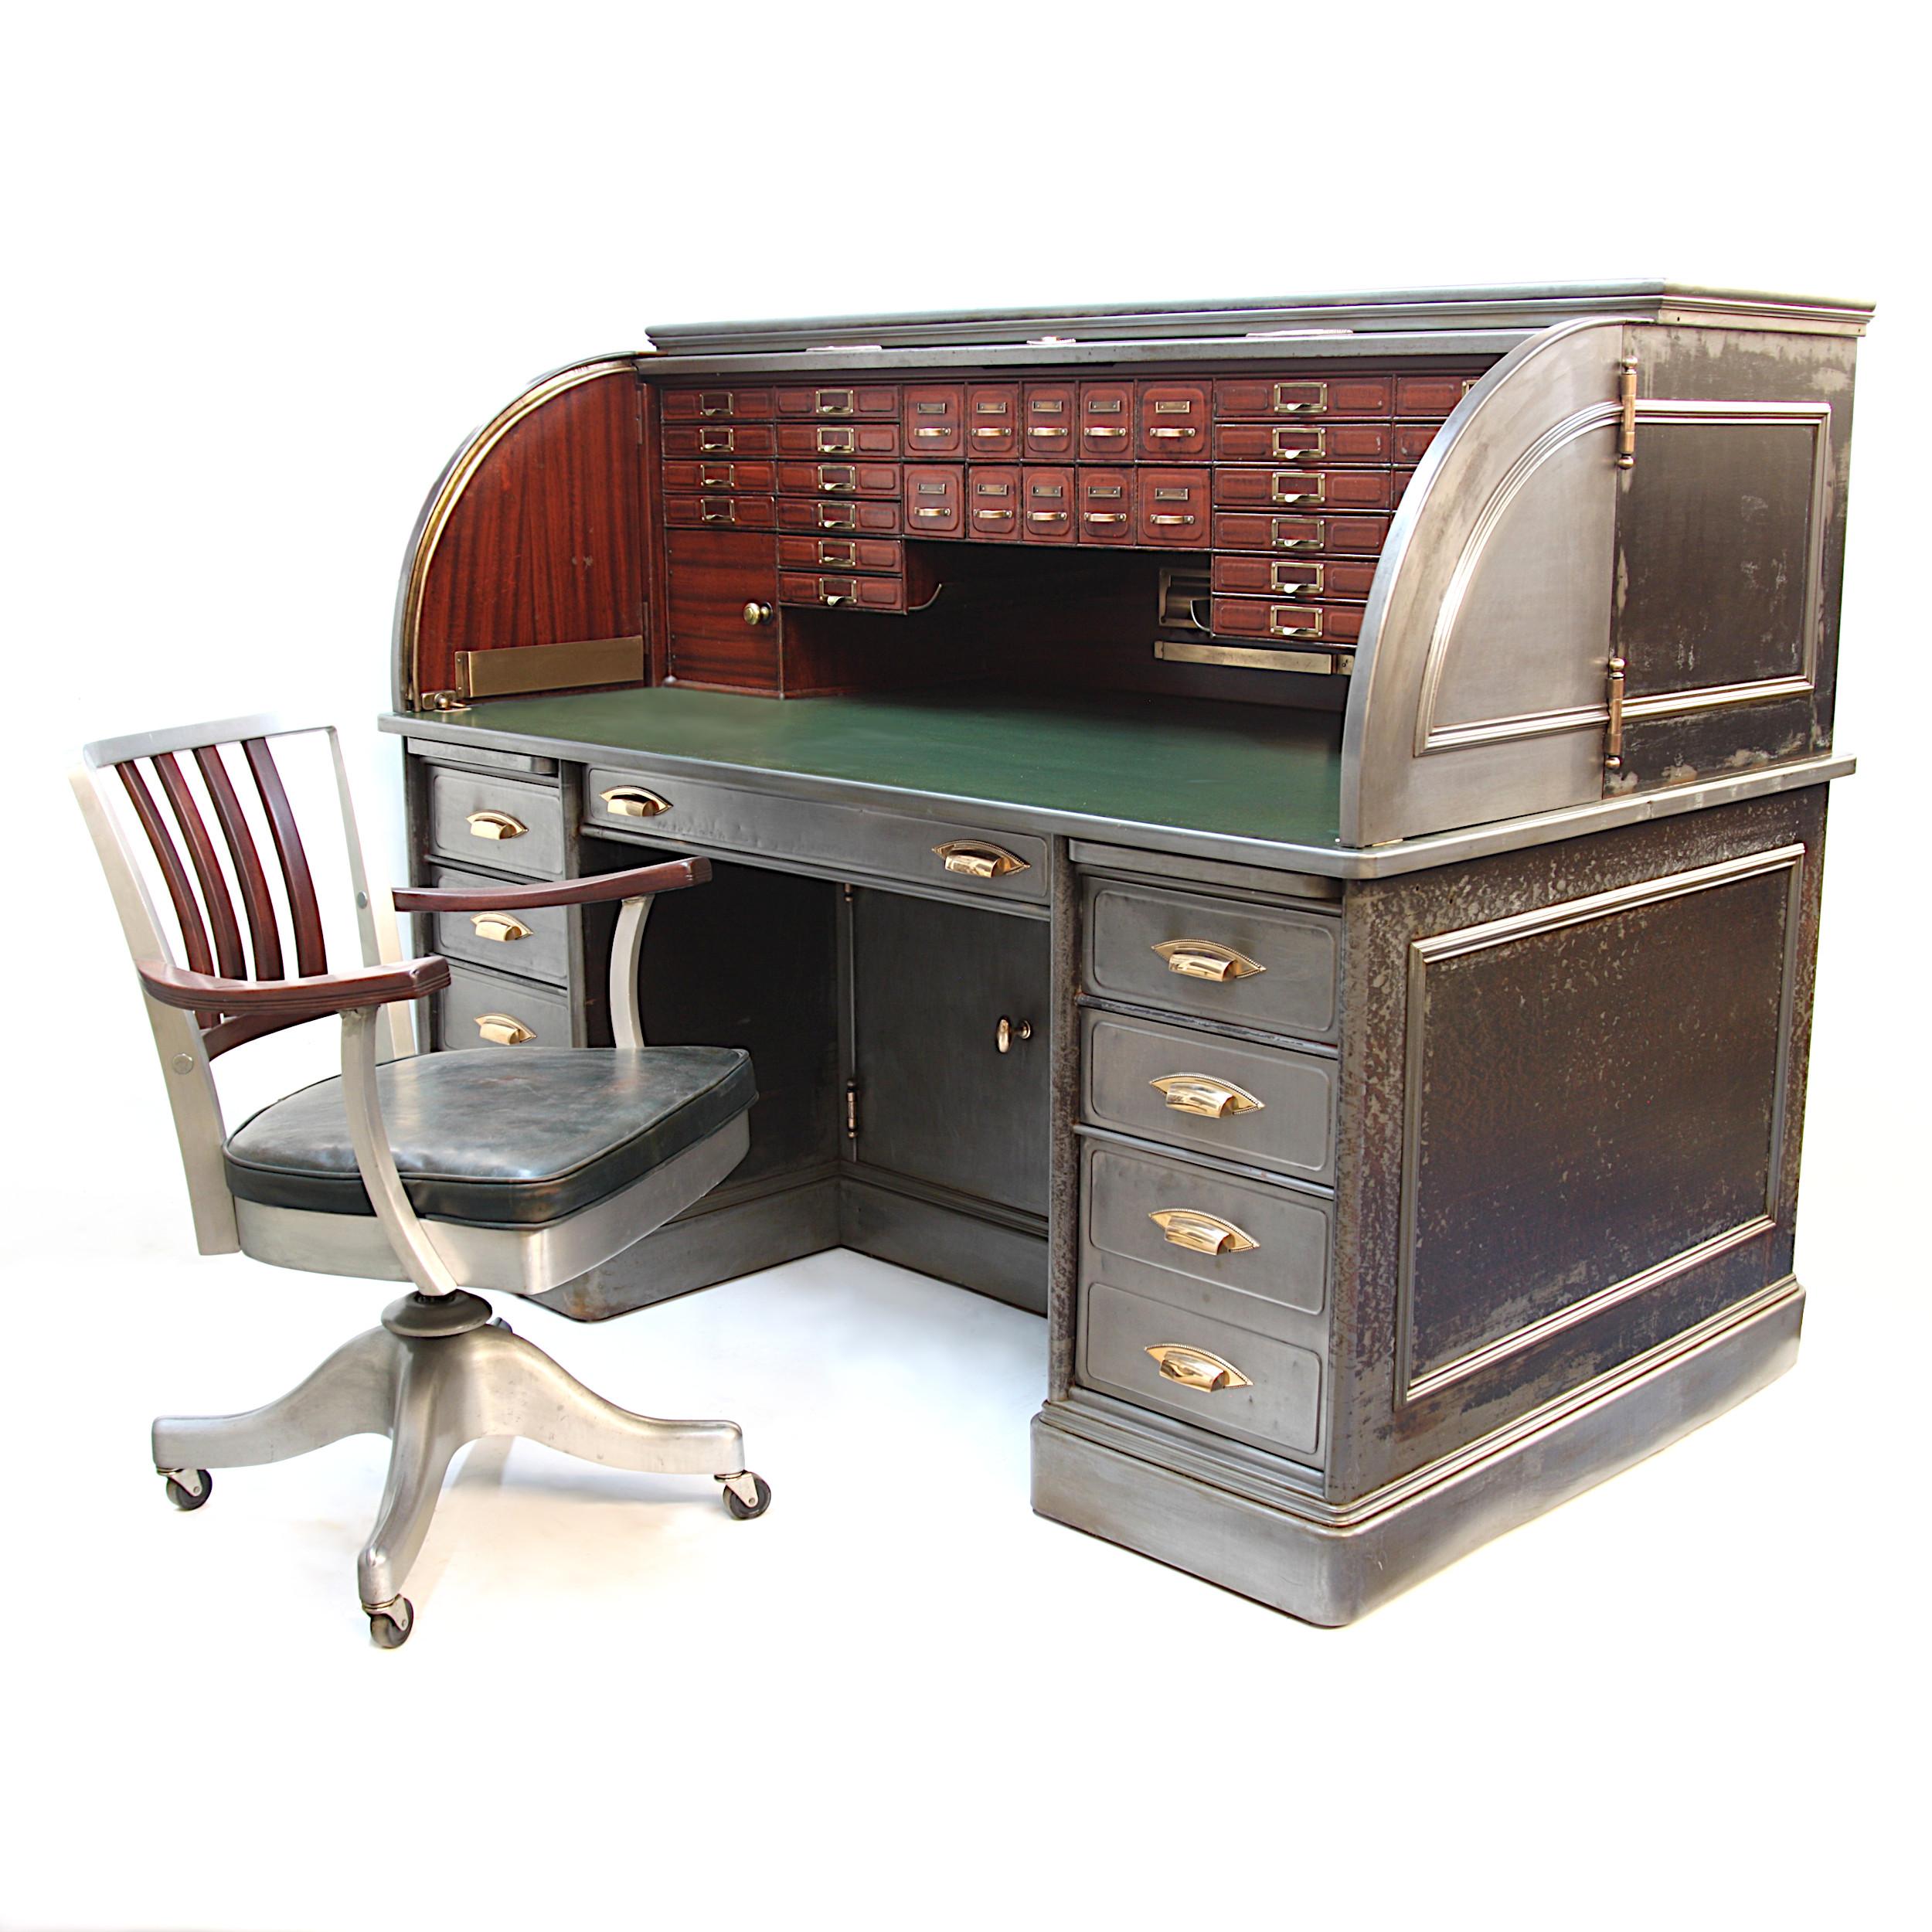 This is an absolute stunner of a roll top! Manufactured by the Art Metal Construction Co. of Jamestown, NY around the turn of the century, this monumental desk is built like a battleship and features nearly as many bells and whistles!

Desk